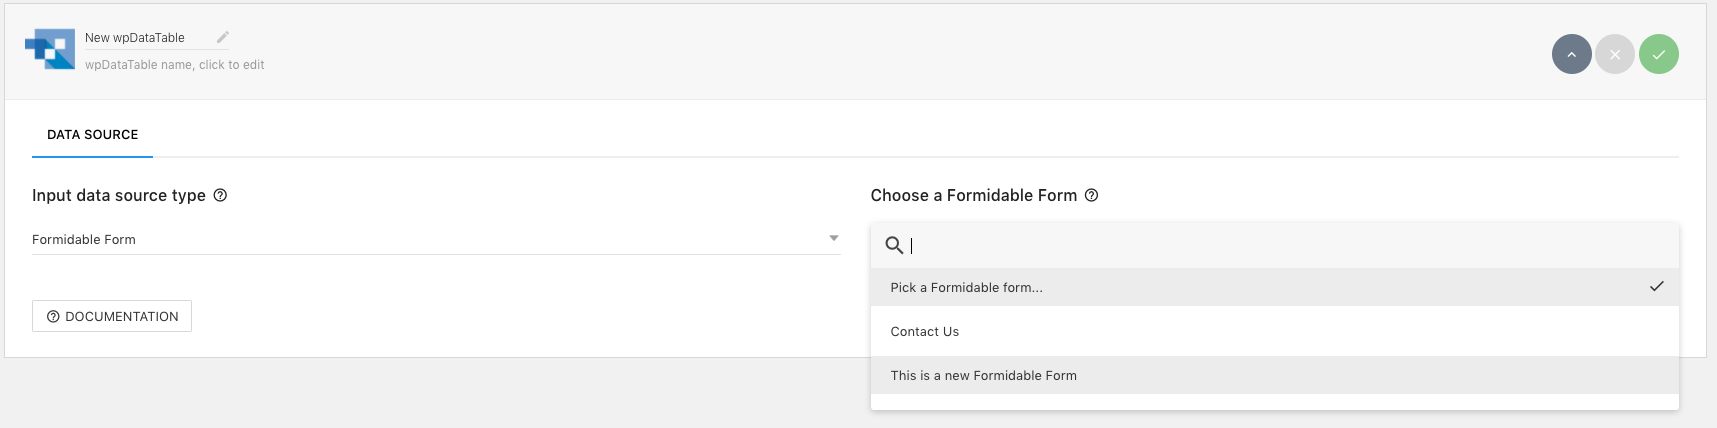 Formidable Forms integration for wpDataTables